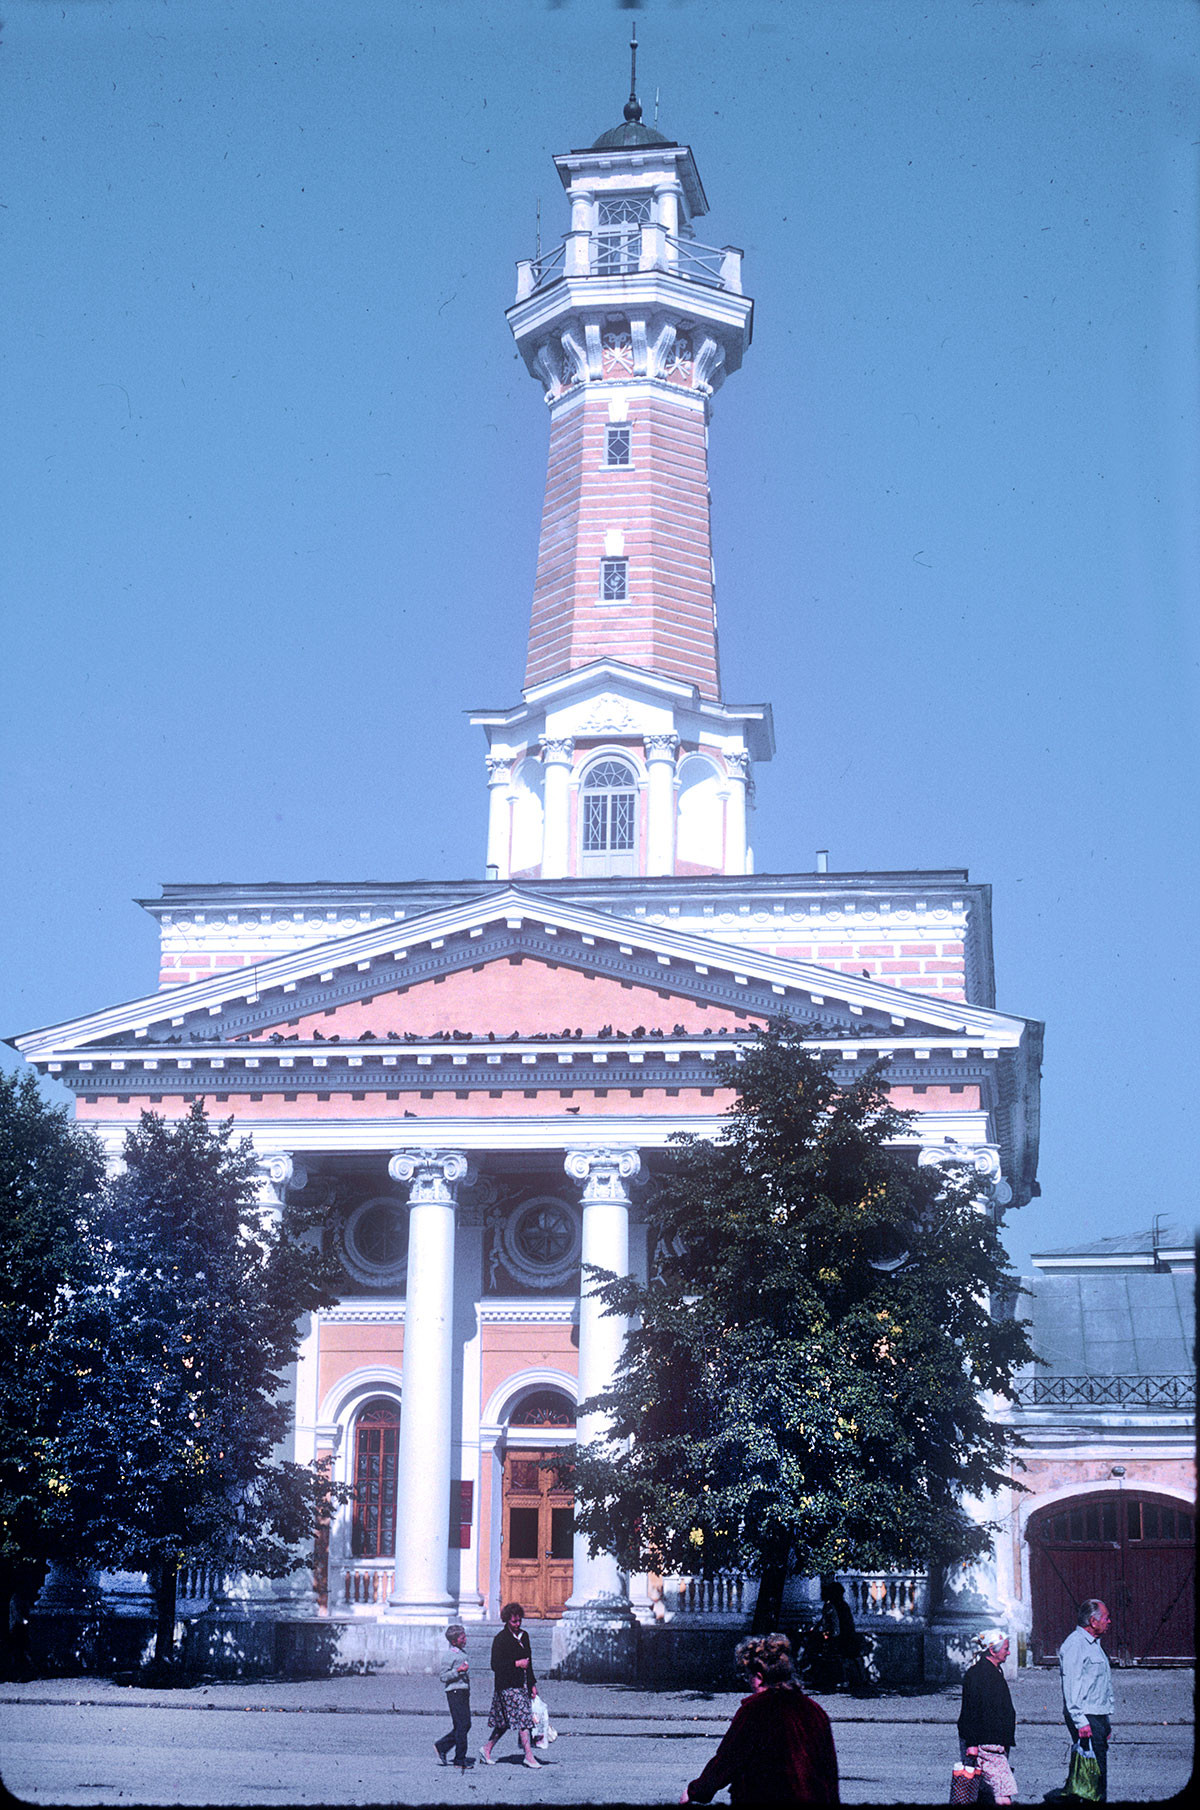 Fire Tower & Station, Susanin Square. August 22, 1988